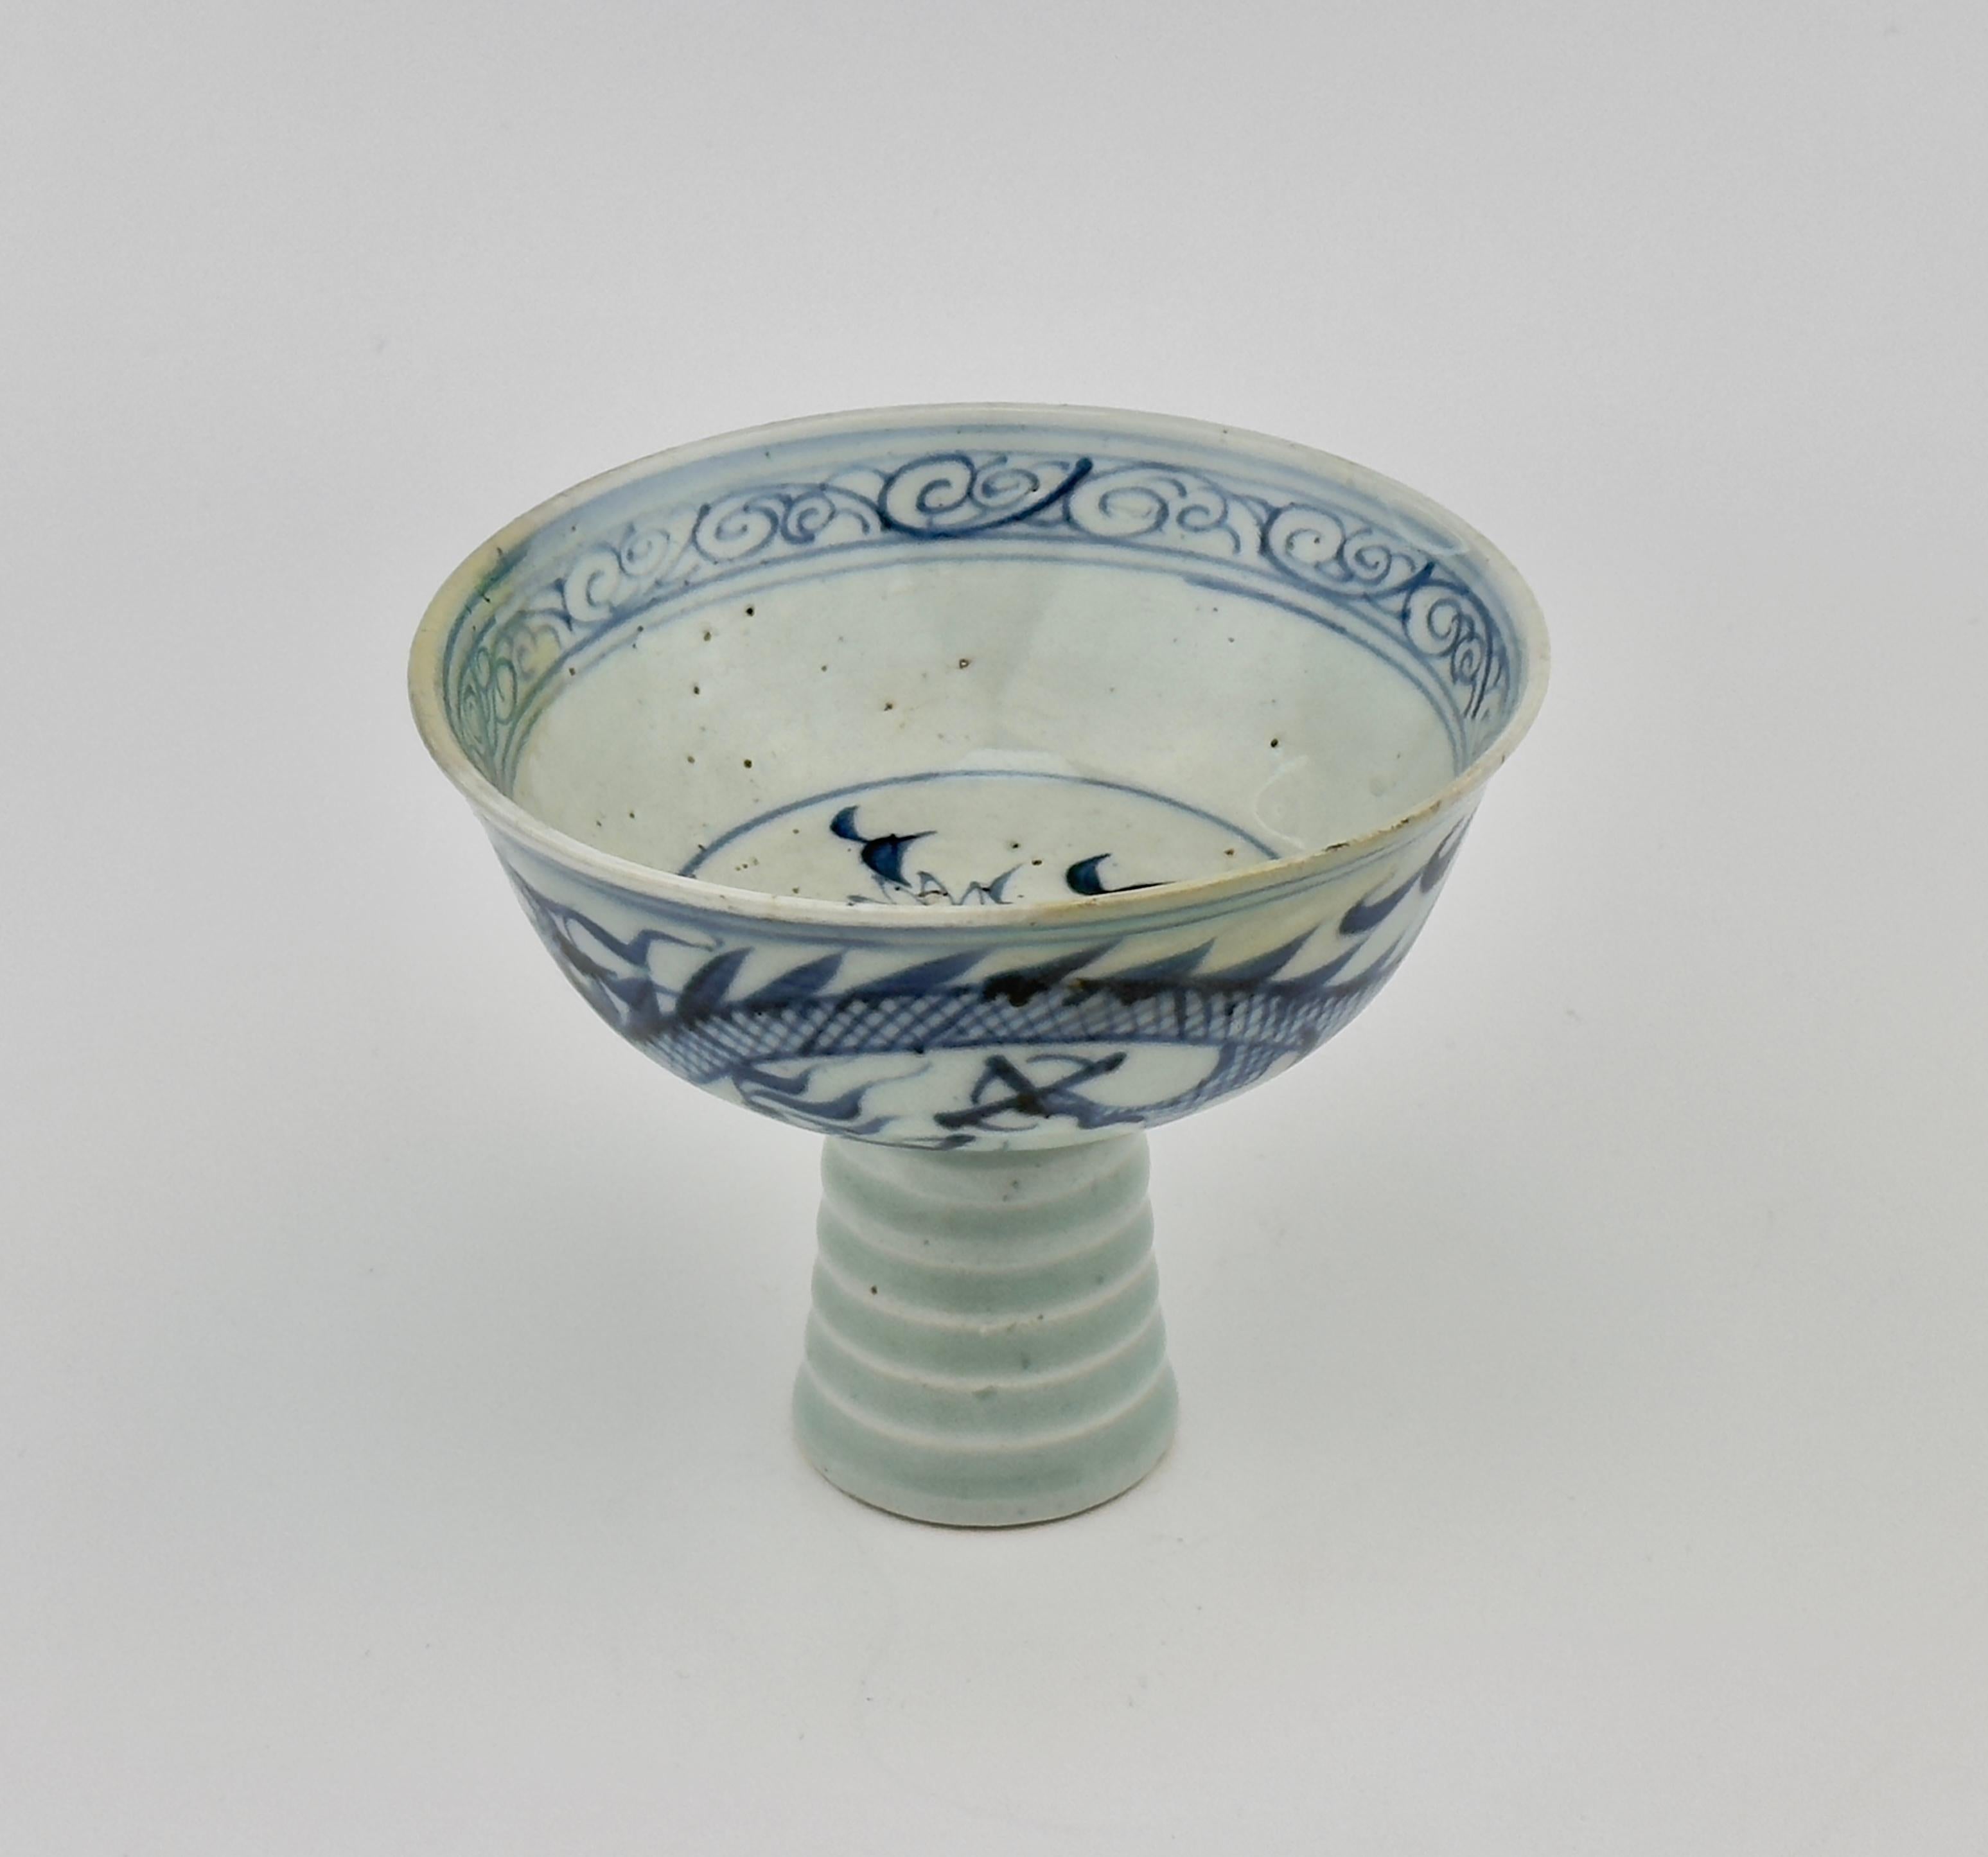 Ceramic Blue And White 'Dragon' Stem Cup, Yuan Dynasty(1271-1368)